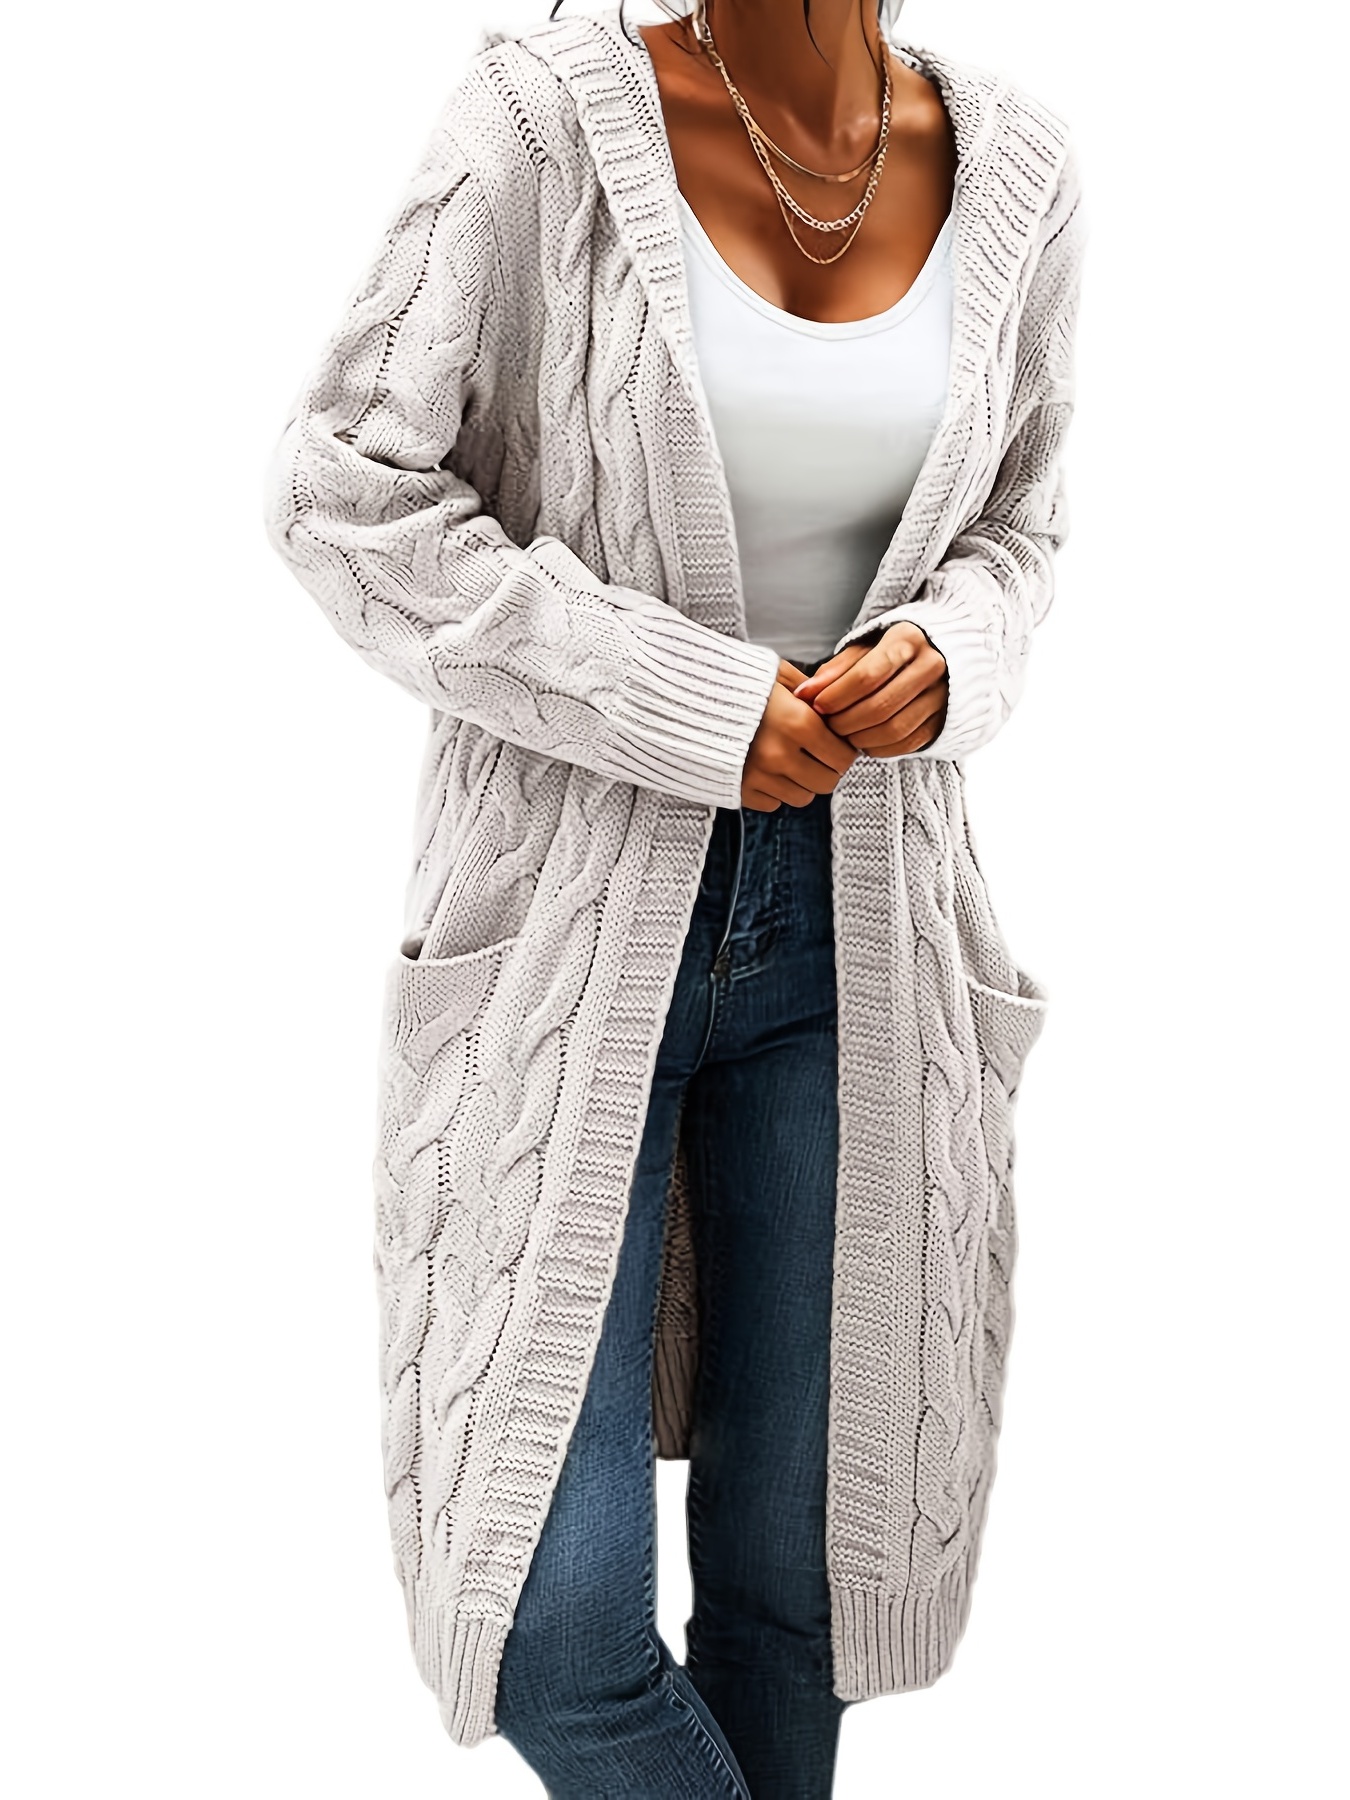 Long Sweaters for Women Cardigan Open Front Long Sleeve Plus Size Chunky  Cable Knit Duster Cardigans with Pockets Winter Coat